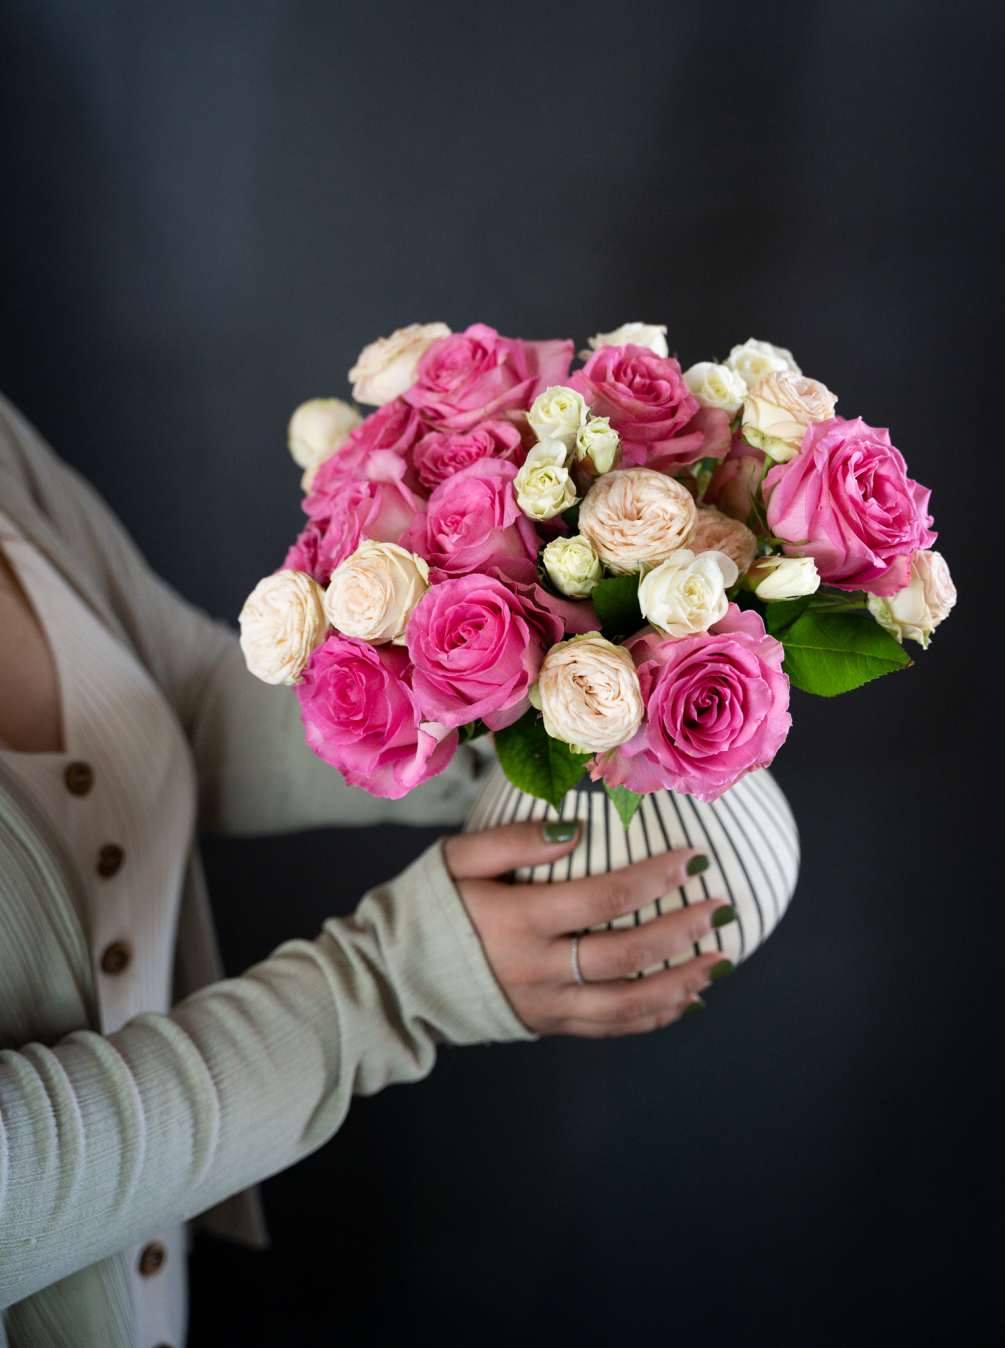 Soft pink roses and garden spray roses erupt out of a stunning